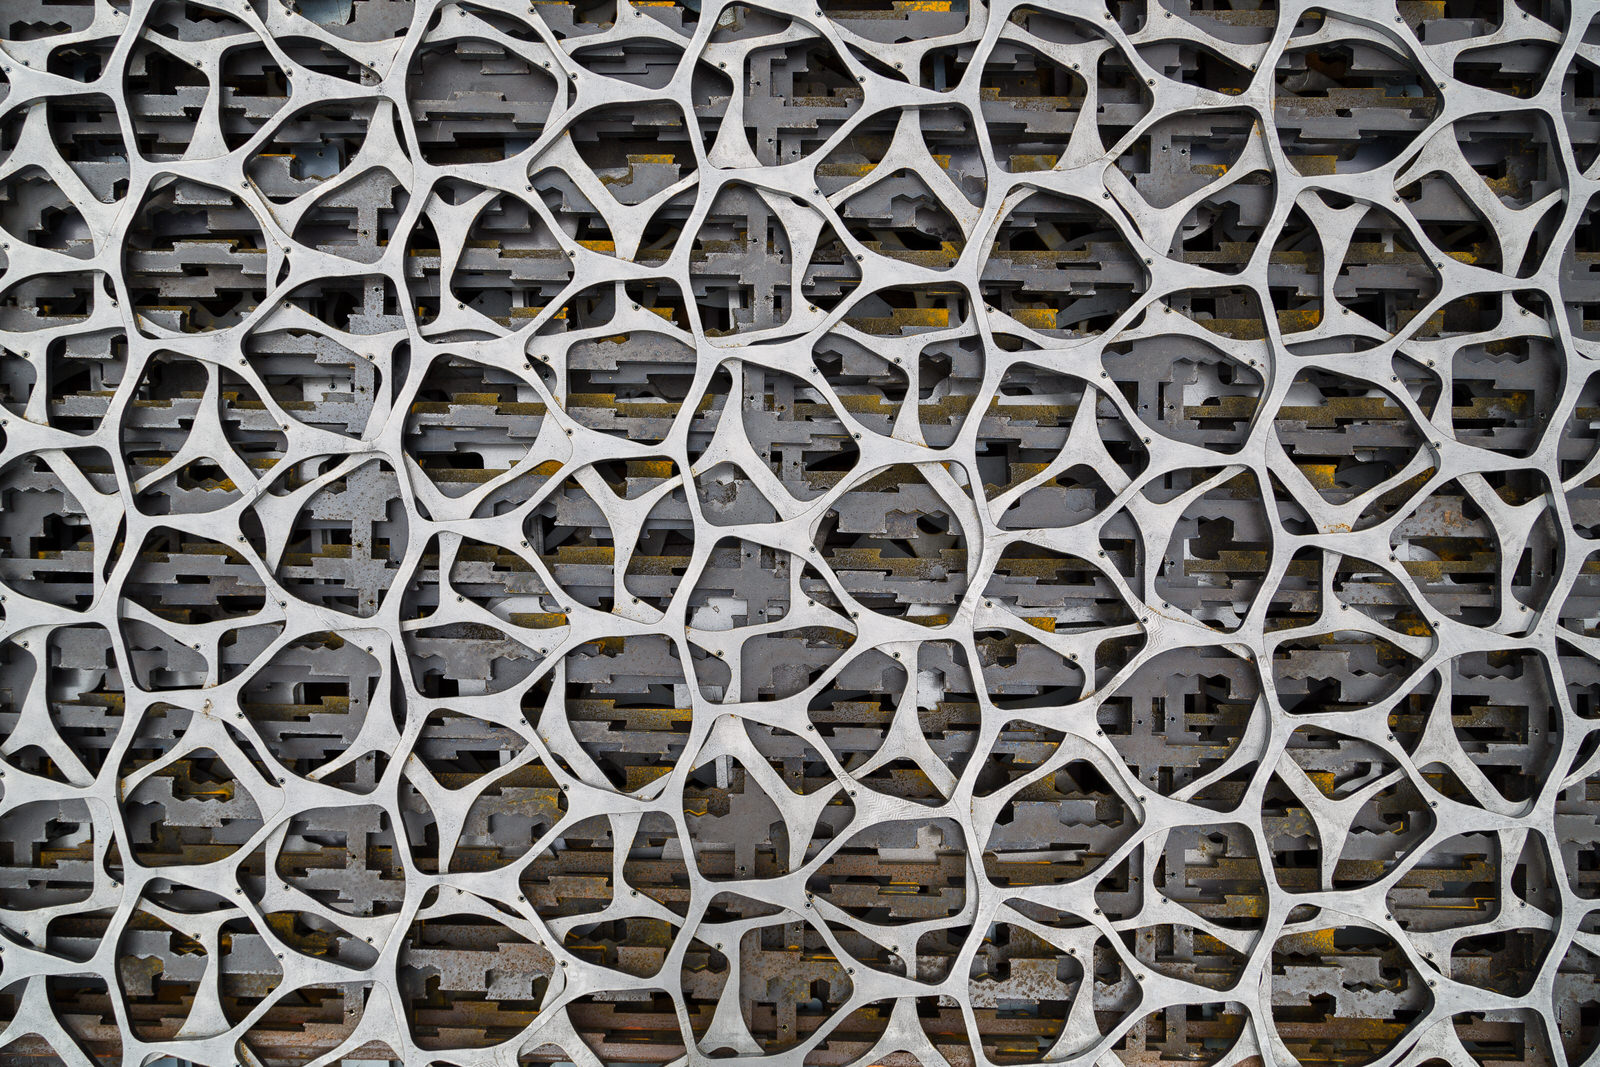  Abstract patterns in the scrap metal pile at Kni-Co Manufacturing 